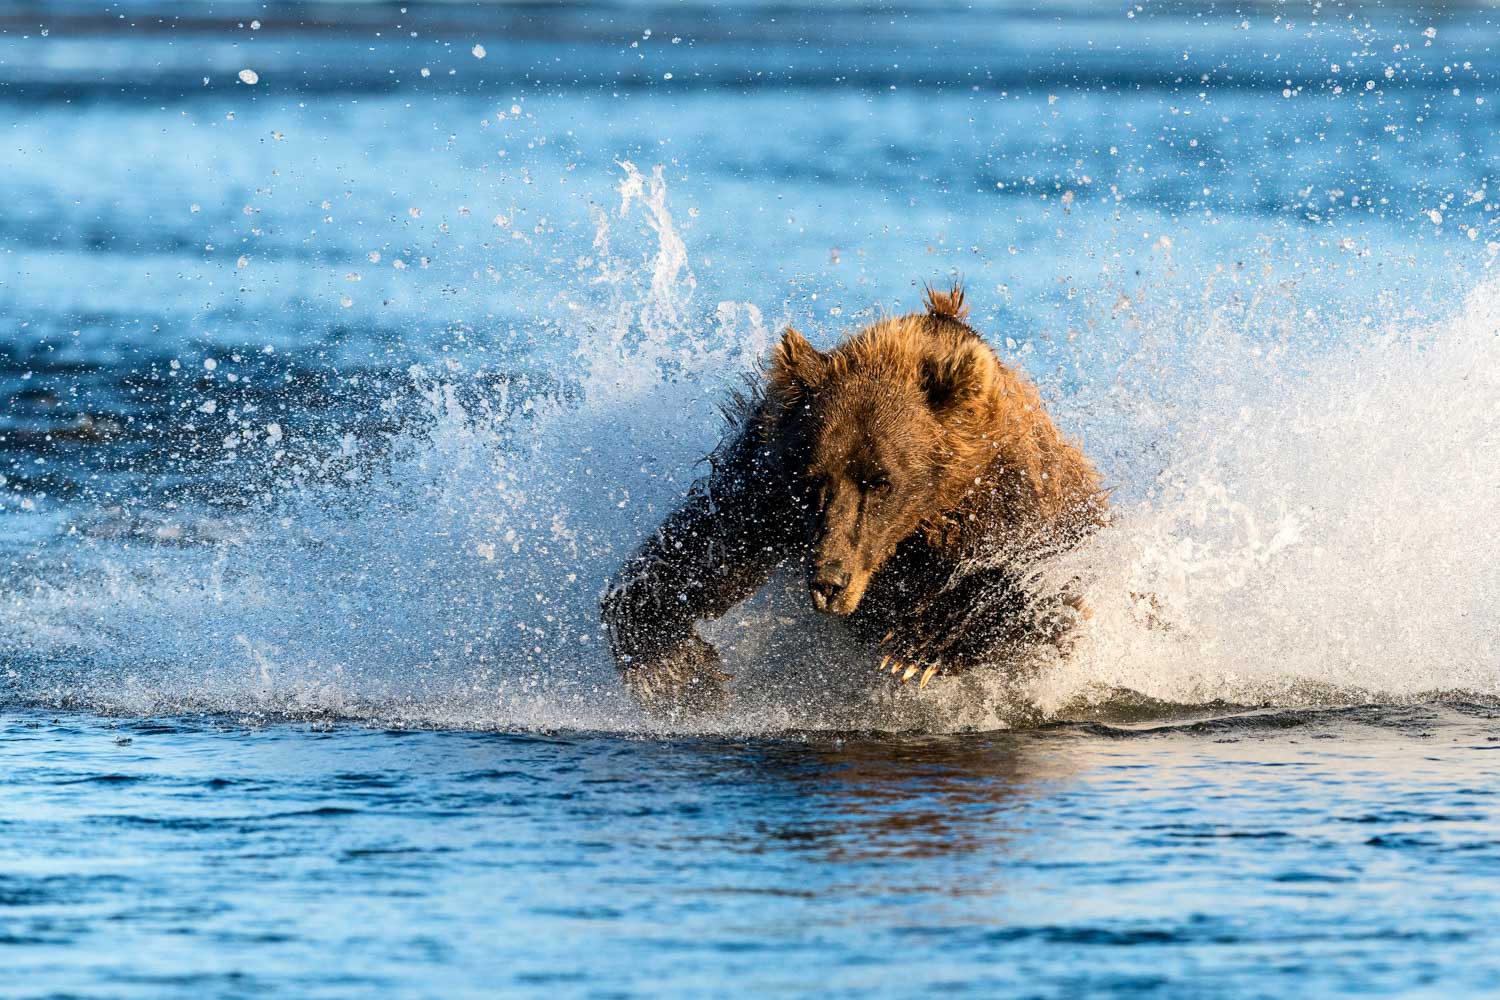 A grizzly bear launches himself at a darting salmon, Silver Salmon Creek;&nbsp;Nikon D810, 500mm, f/6.3, 1/2000s, ISO 800